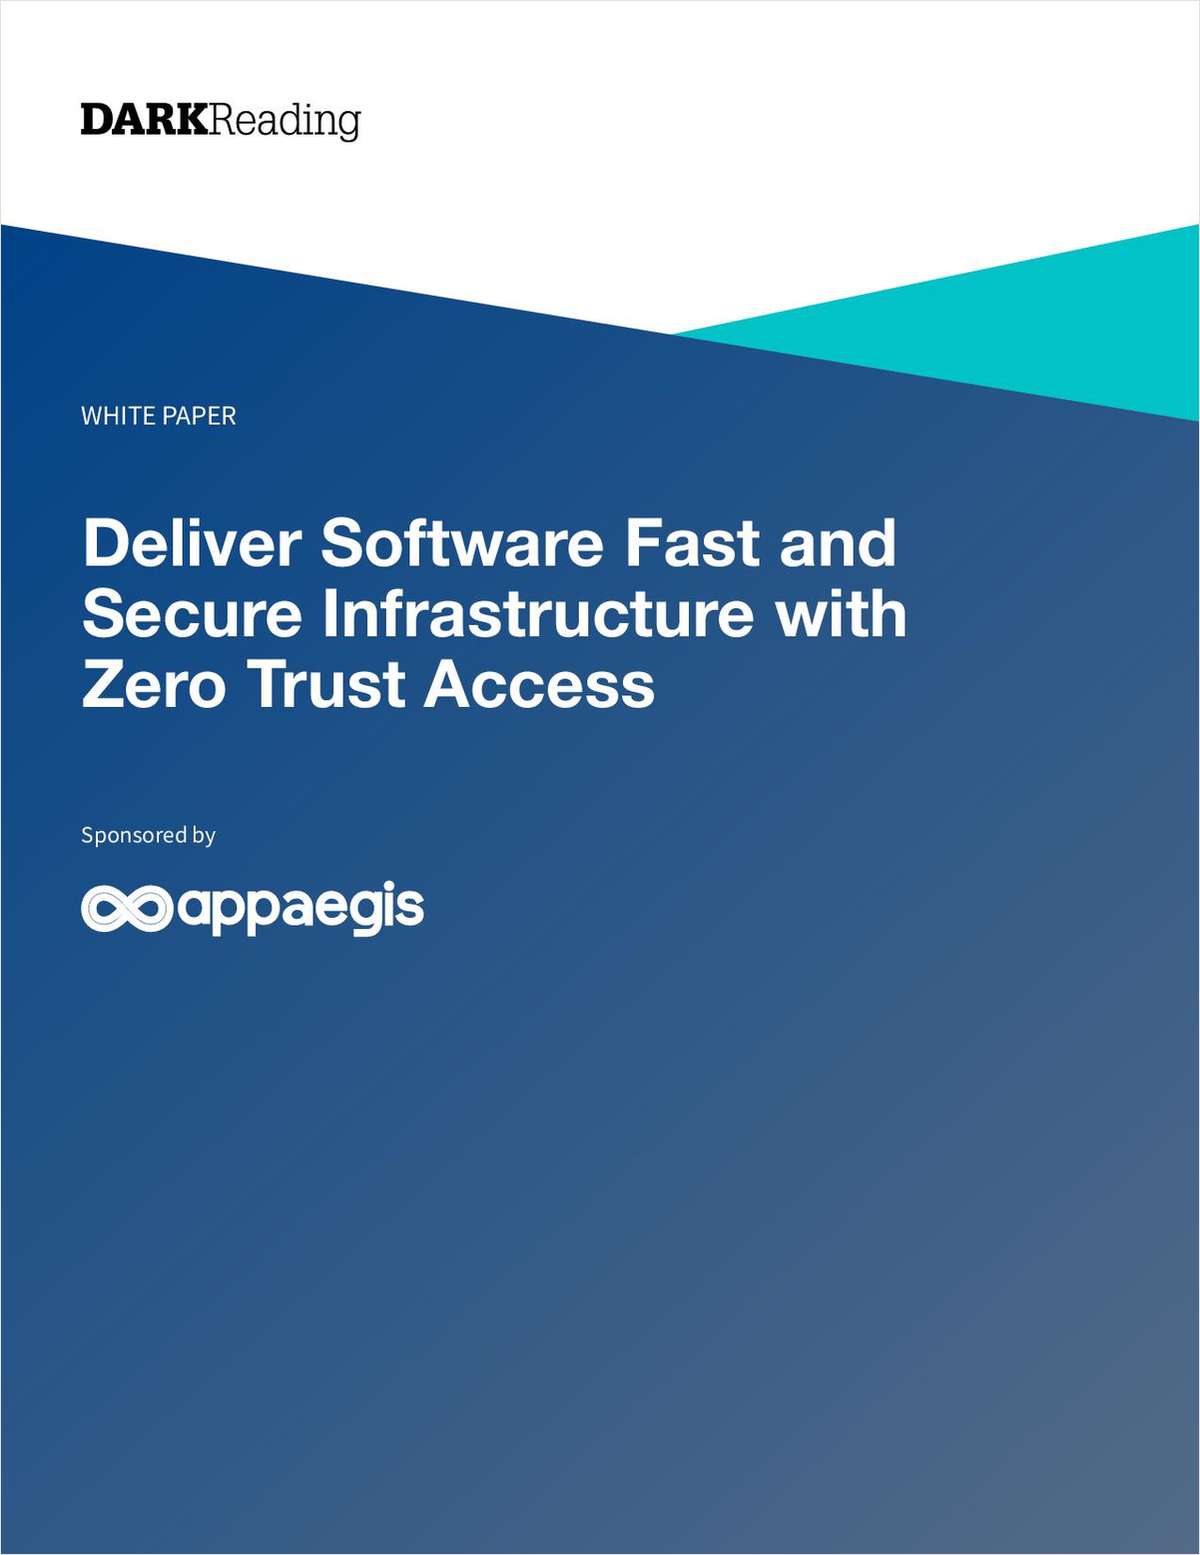 Deliver Software Fast and Secure Infrastructure with Zero Trust Access